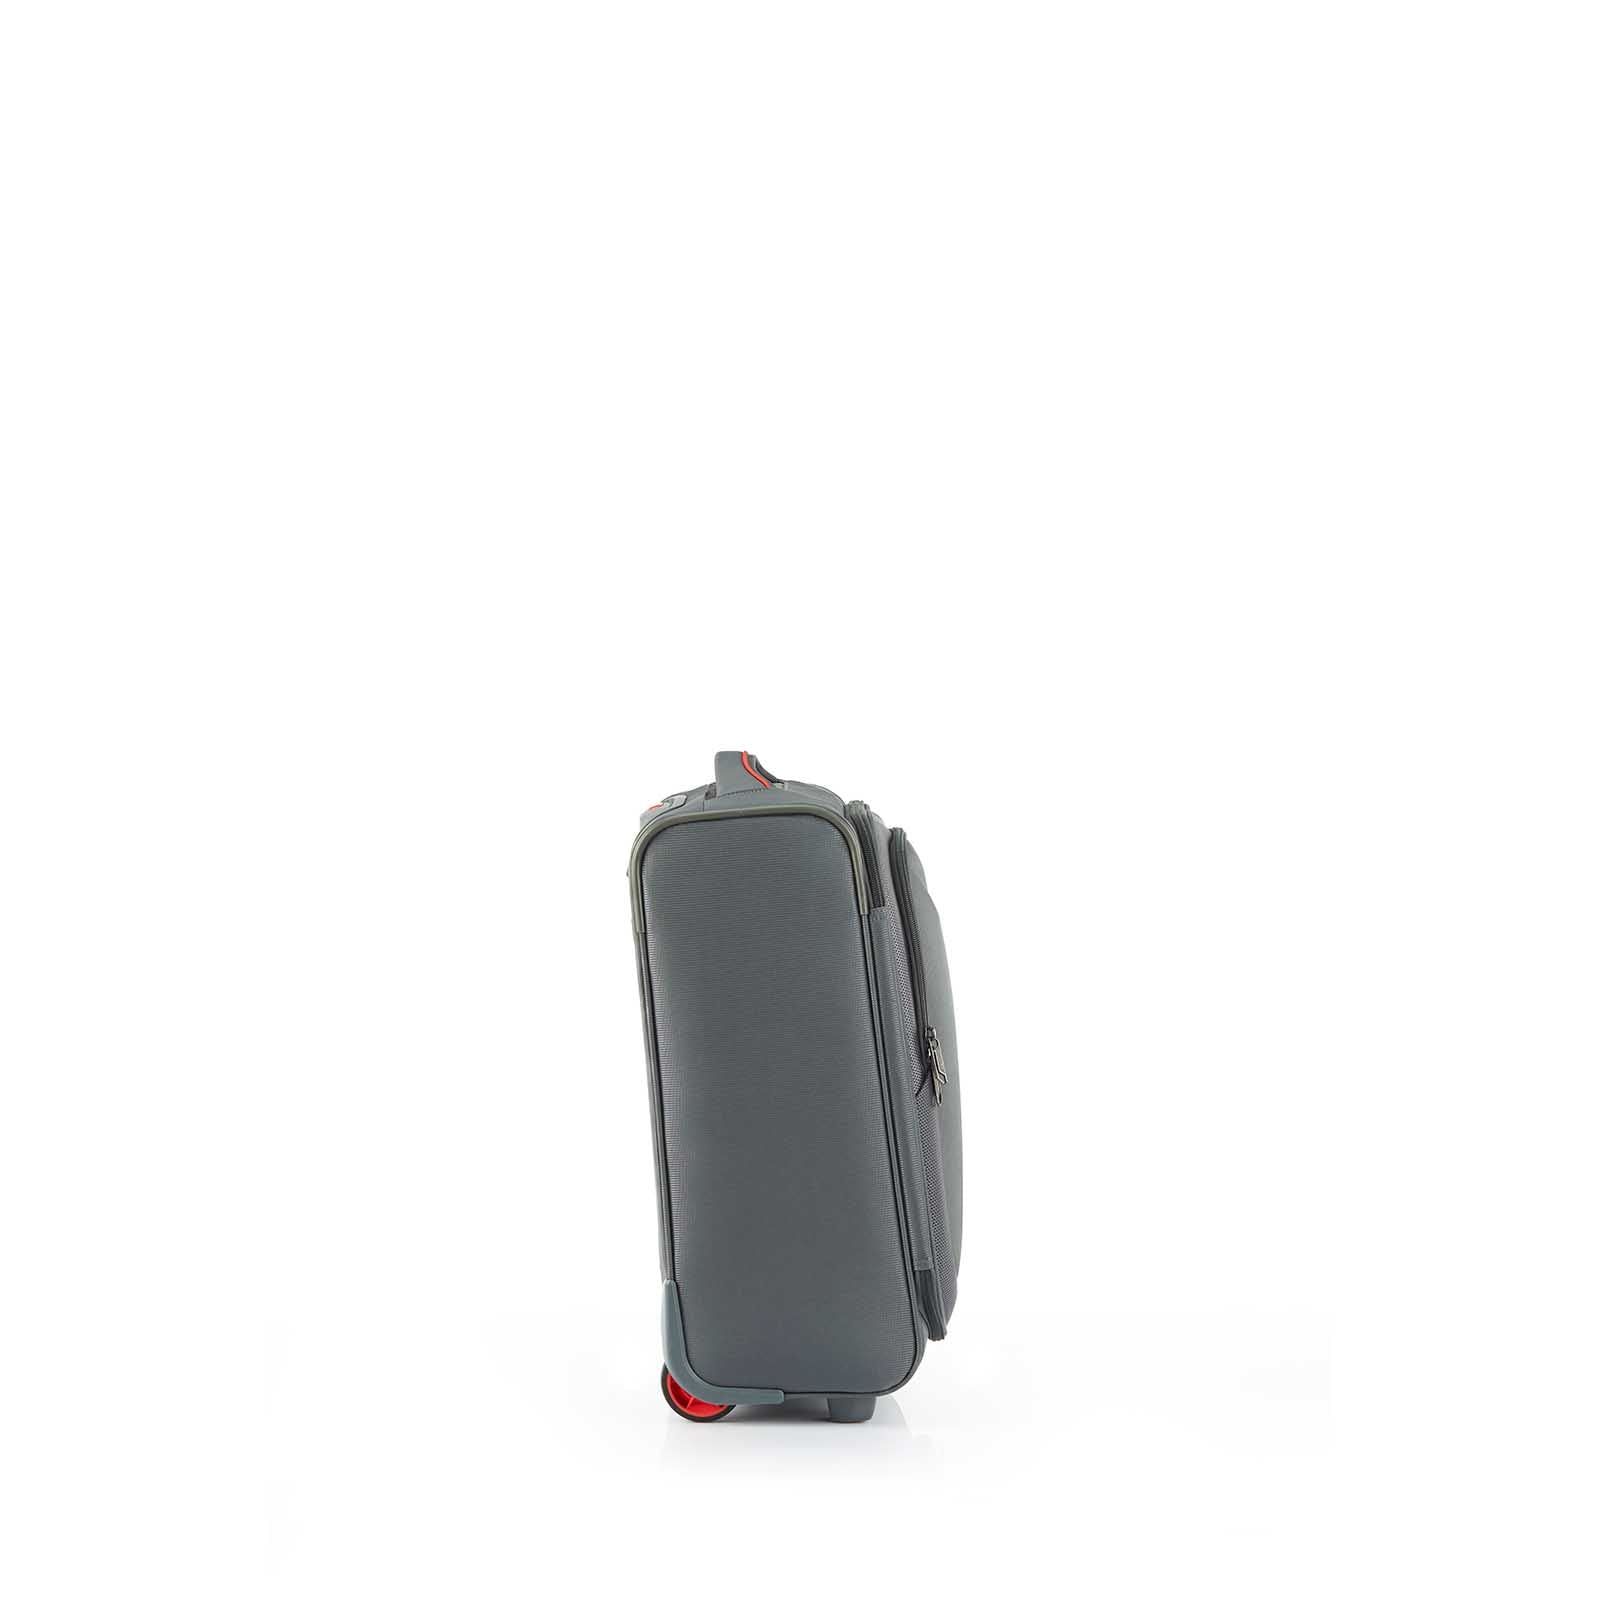 American-Tourister-Applite-4-Eco-50cm-Carry-On-Suitcase-Grey-Red-Side-LH